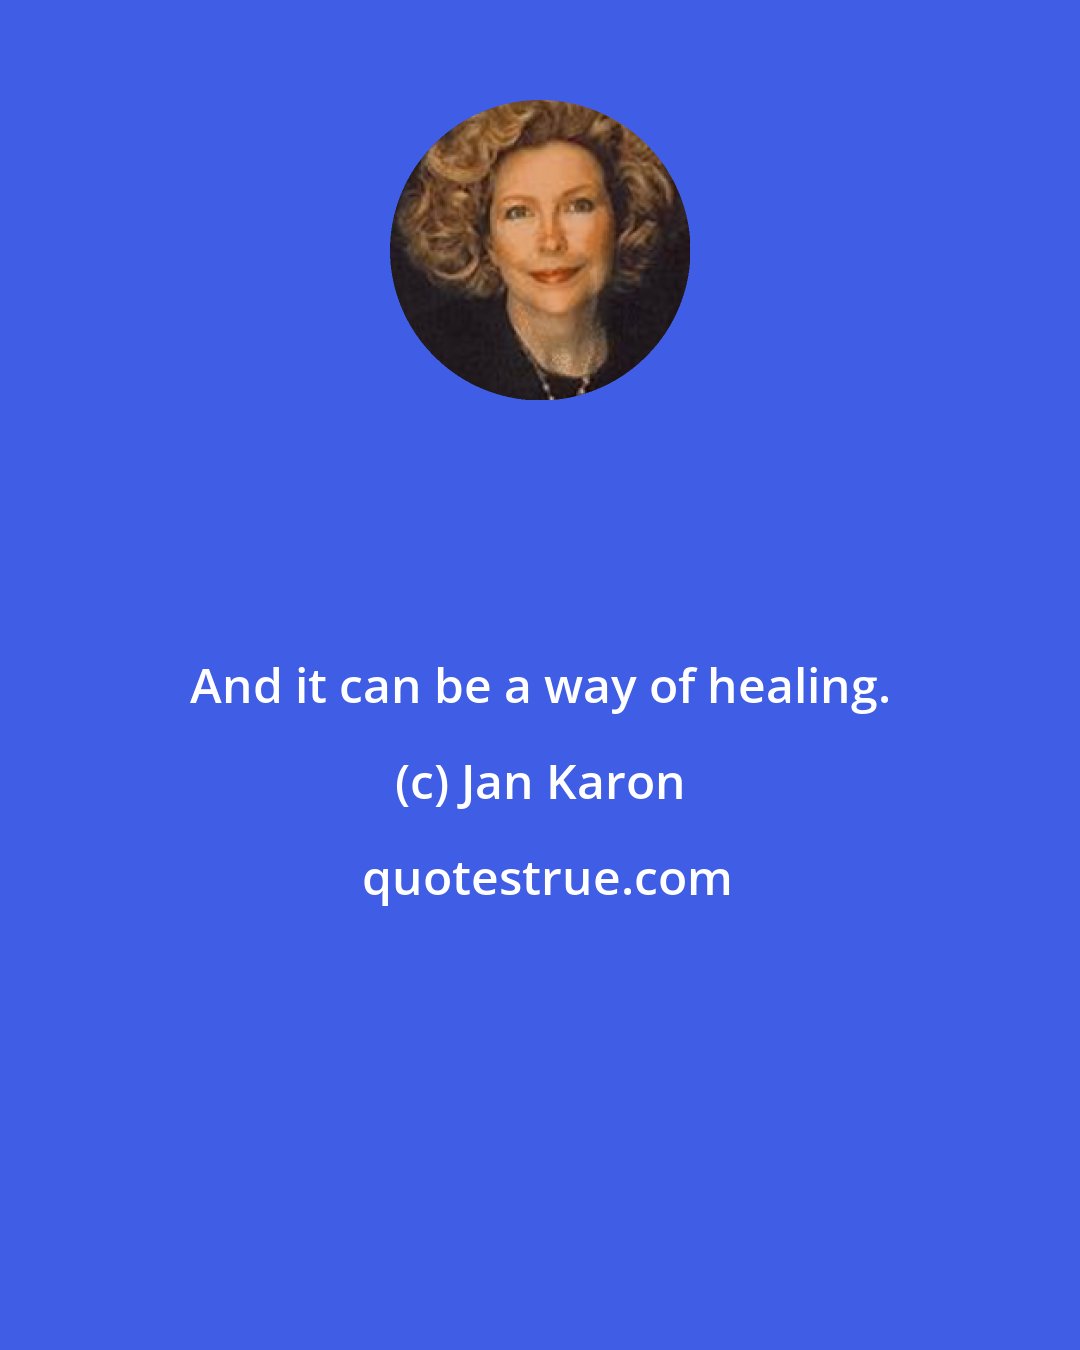 Jan Karon: And it can be a way of healing.